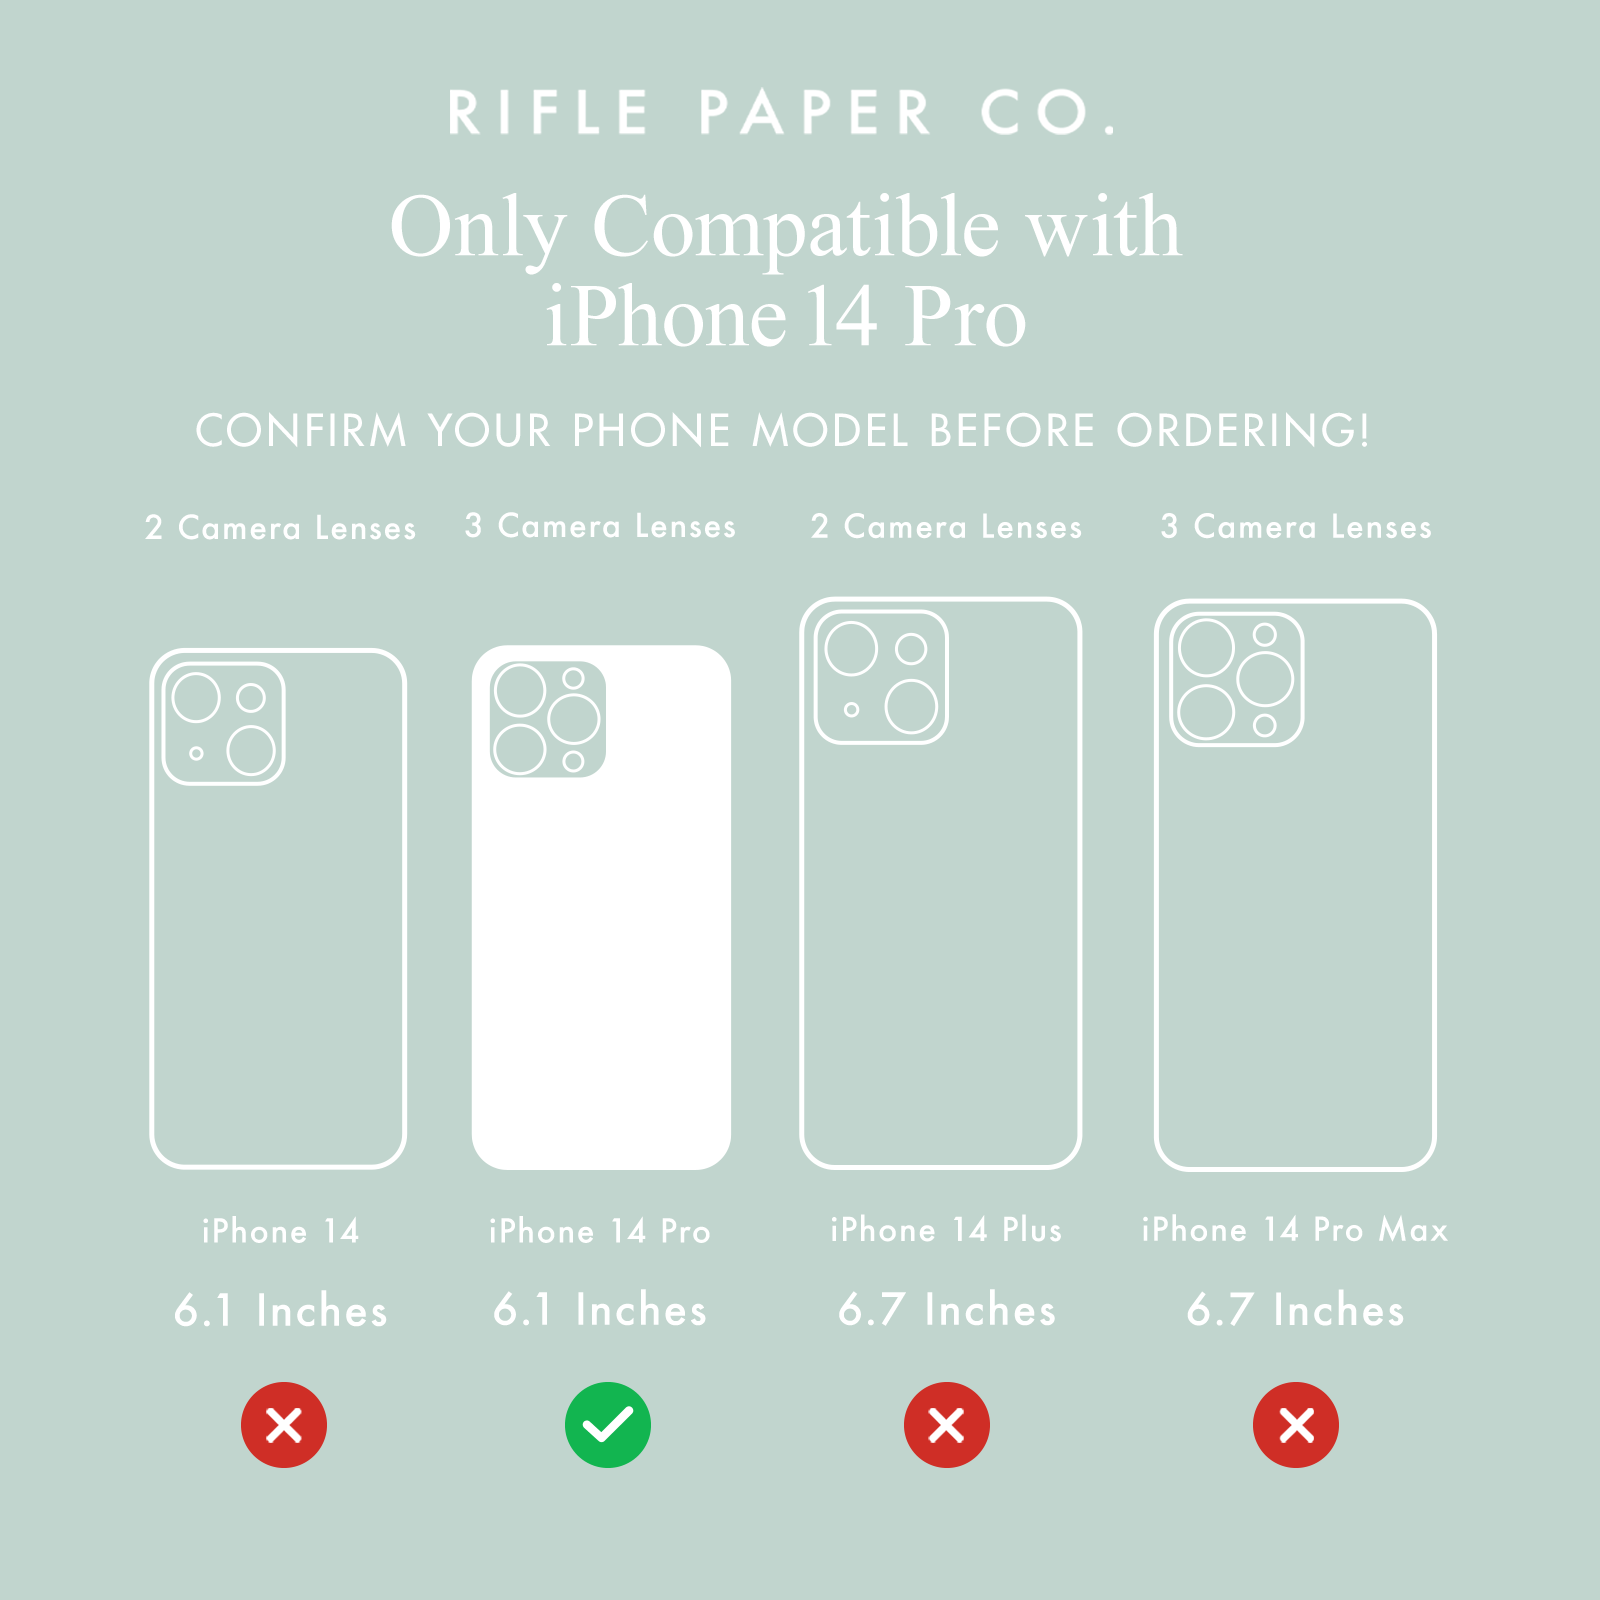 Only compatible with iPhone 14 Pro. Confirm your iPhone model before ordering! 